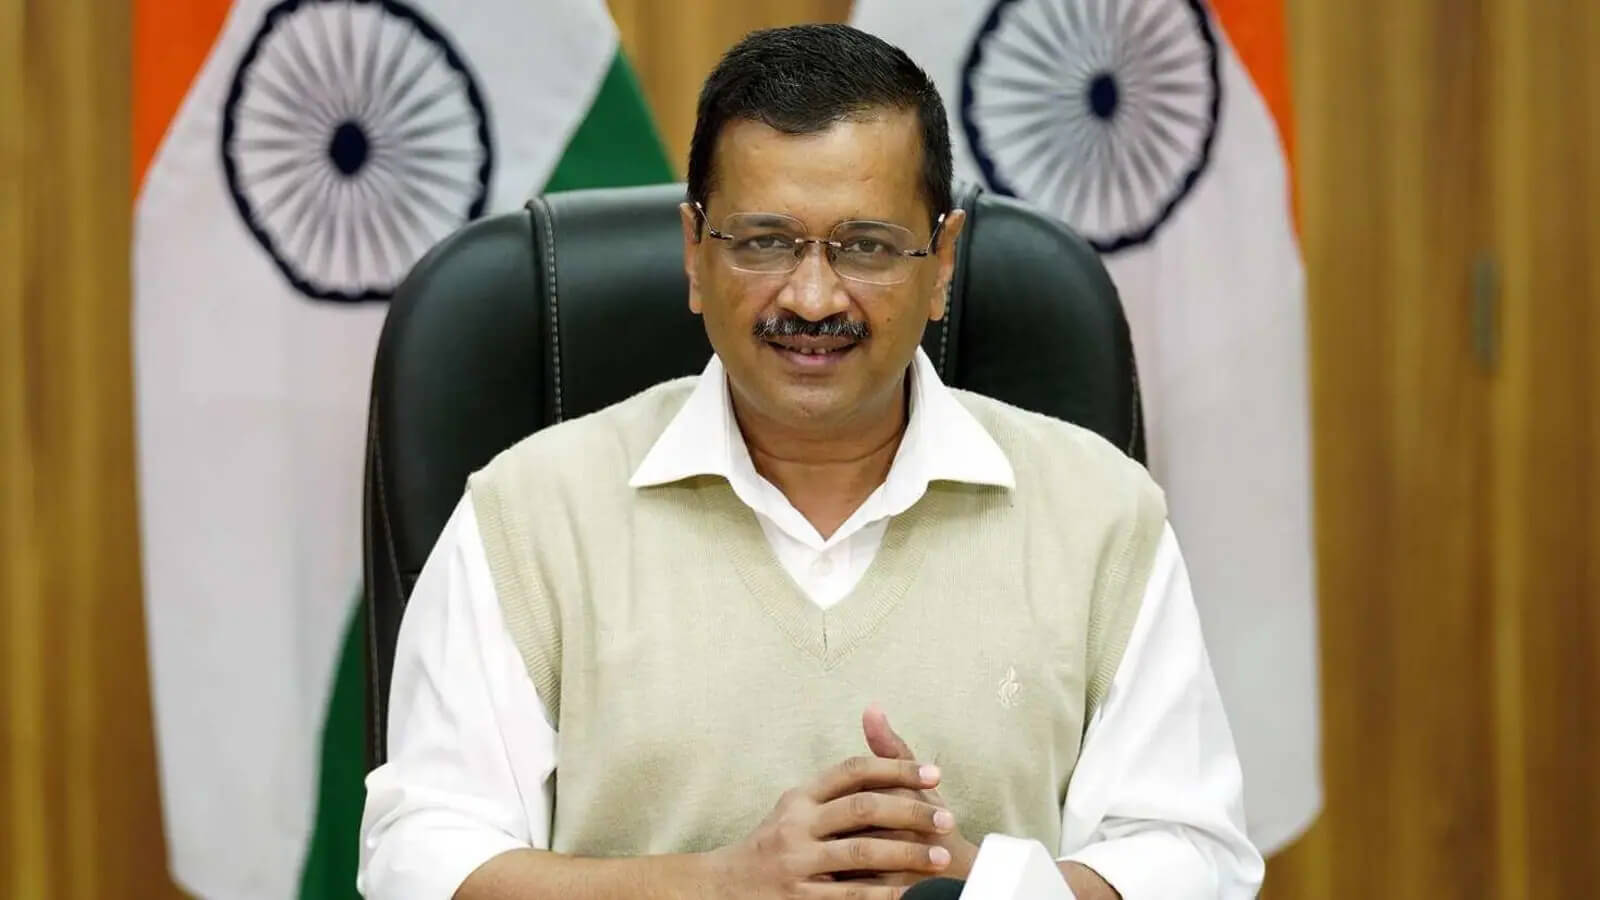 “Unwarranted, Unacceptable”: India Rejects Repeated US Remarks on Kejriwal’s Arrest